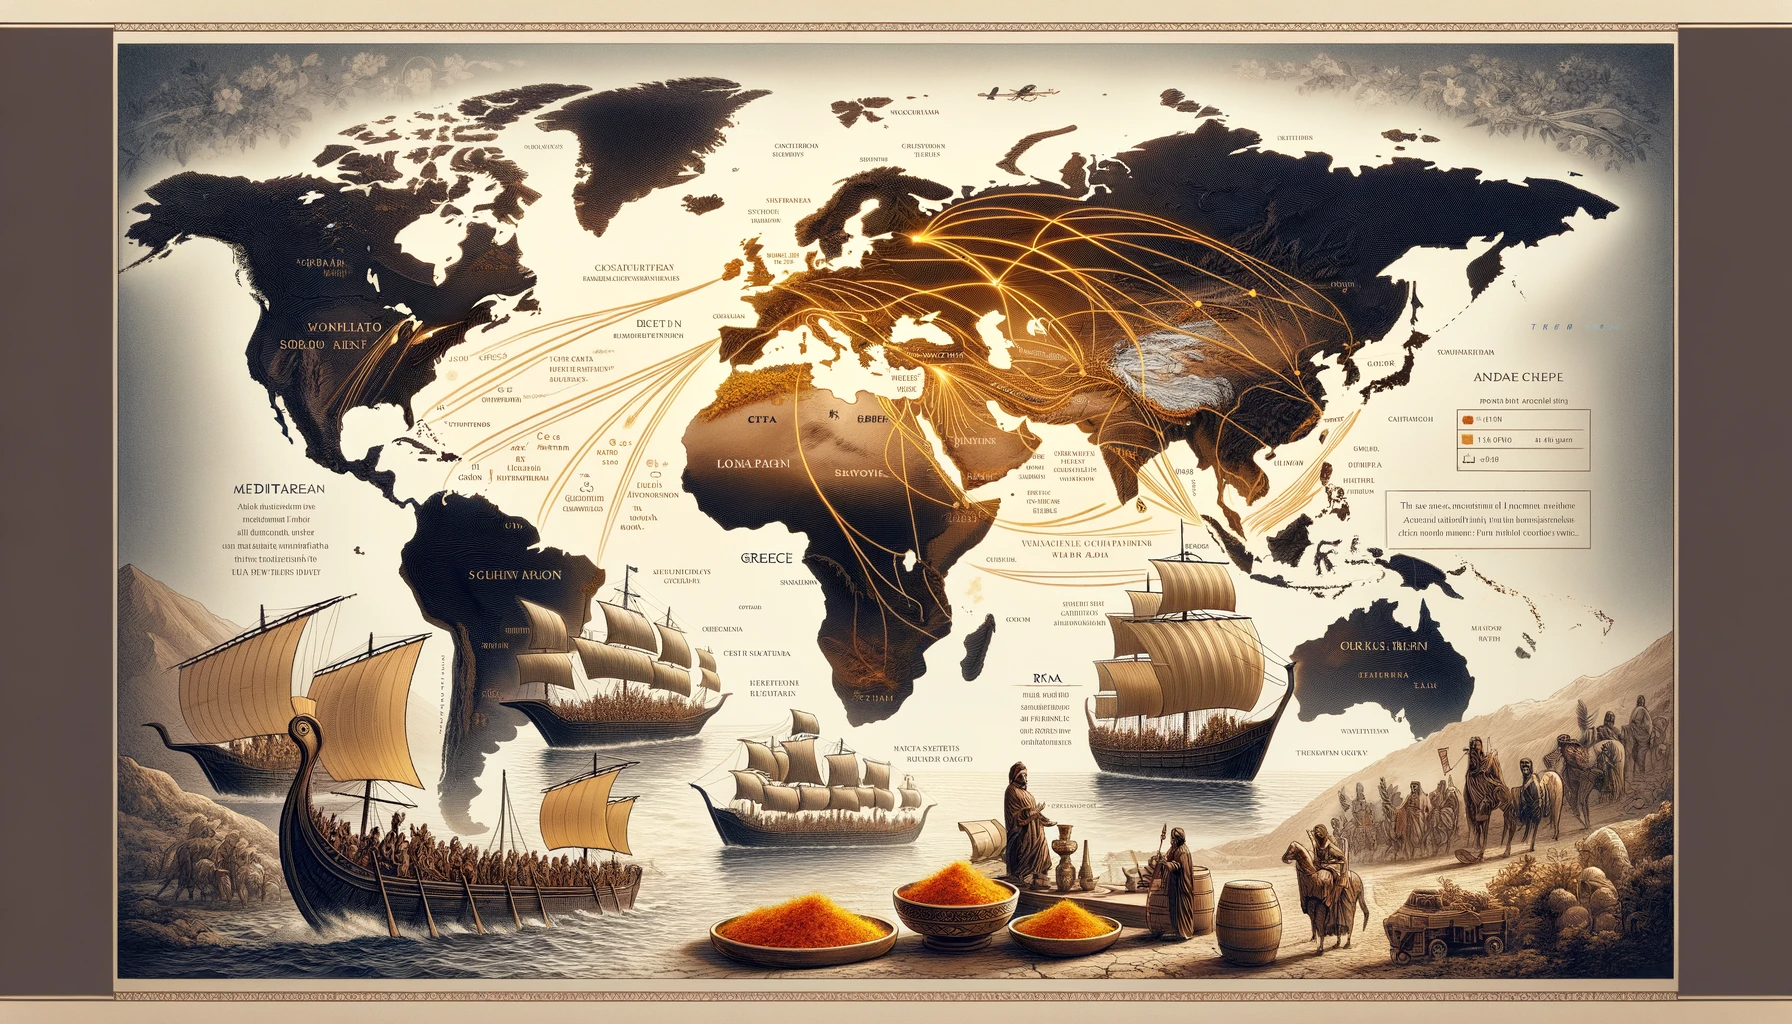 artistic illustration of world map highlighting the journey of saffron with historical accuracy. Also showing different kinds of ships, merchants and traders. The path of the journey is traced with golden threads.